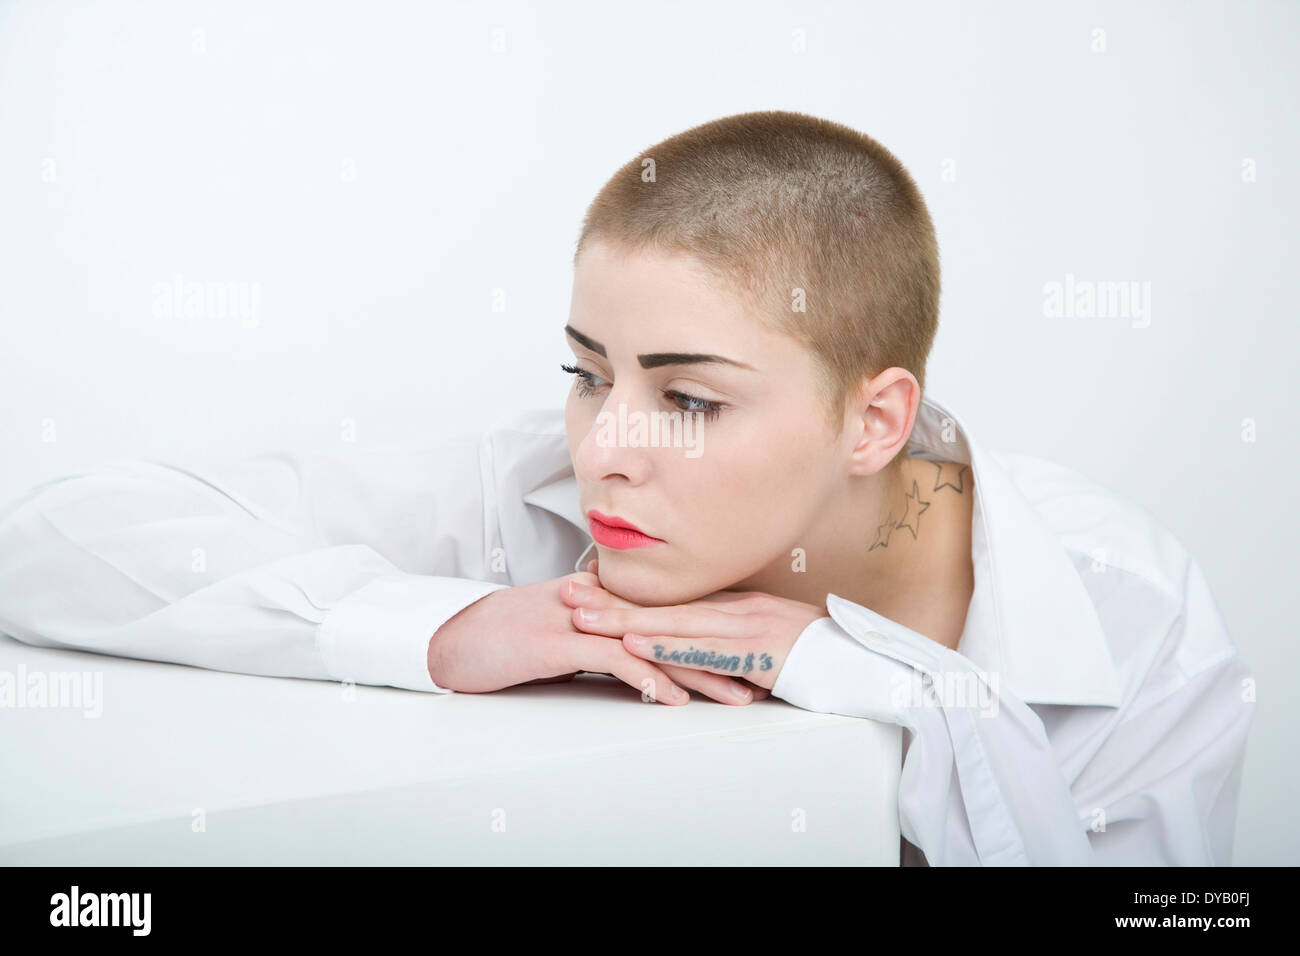 Woman with a shaved head leaning against a white box. Stock Photo